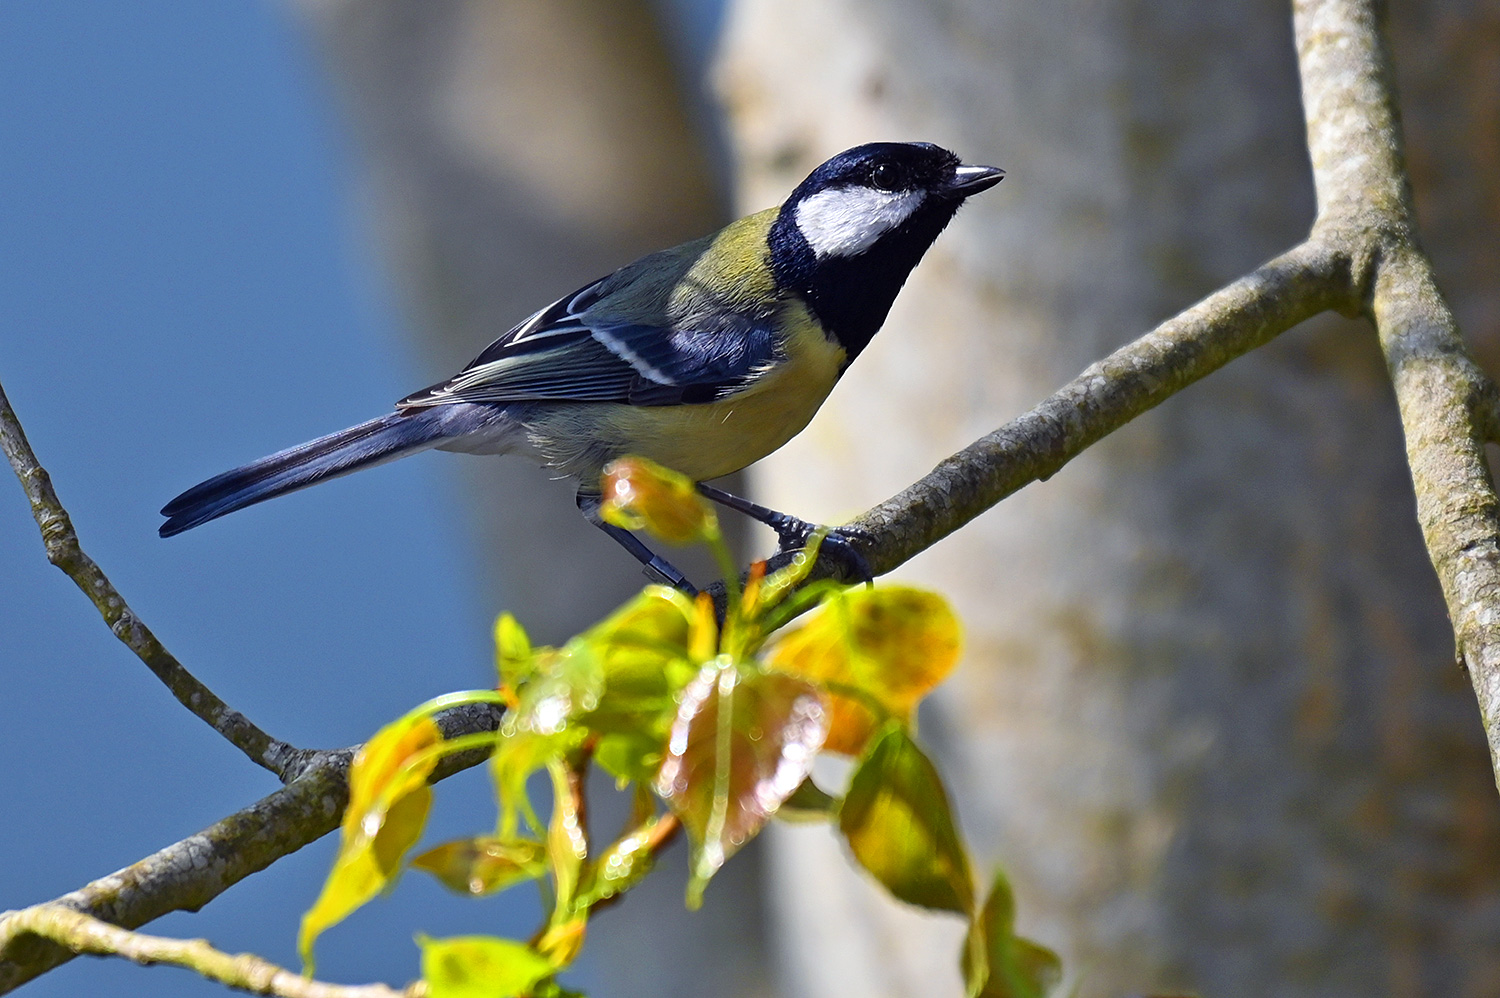 Great Tit above some fresh leaves